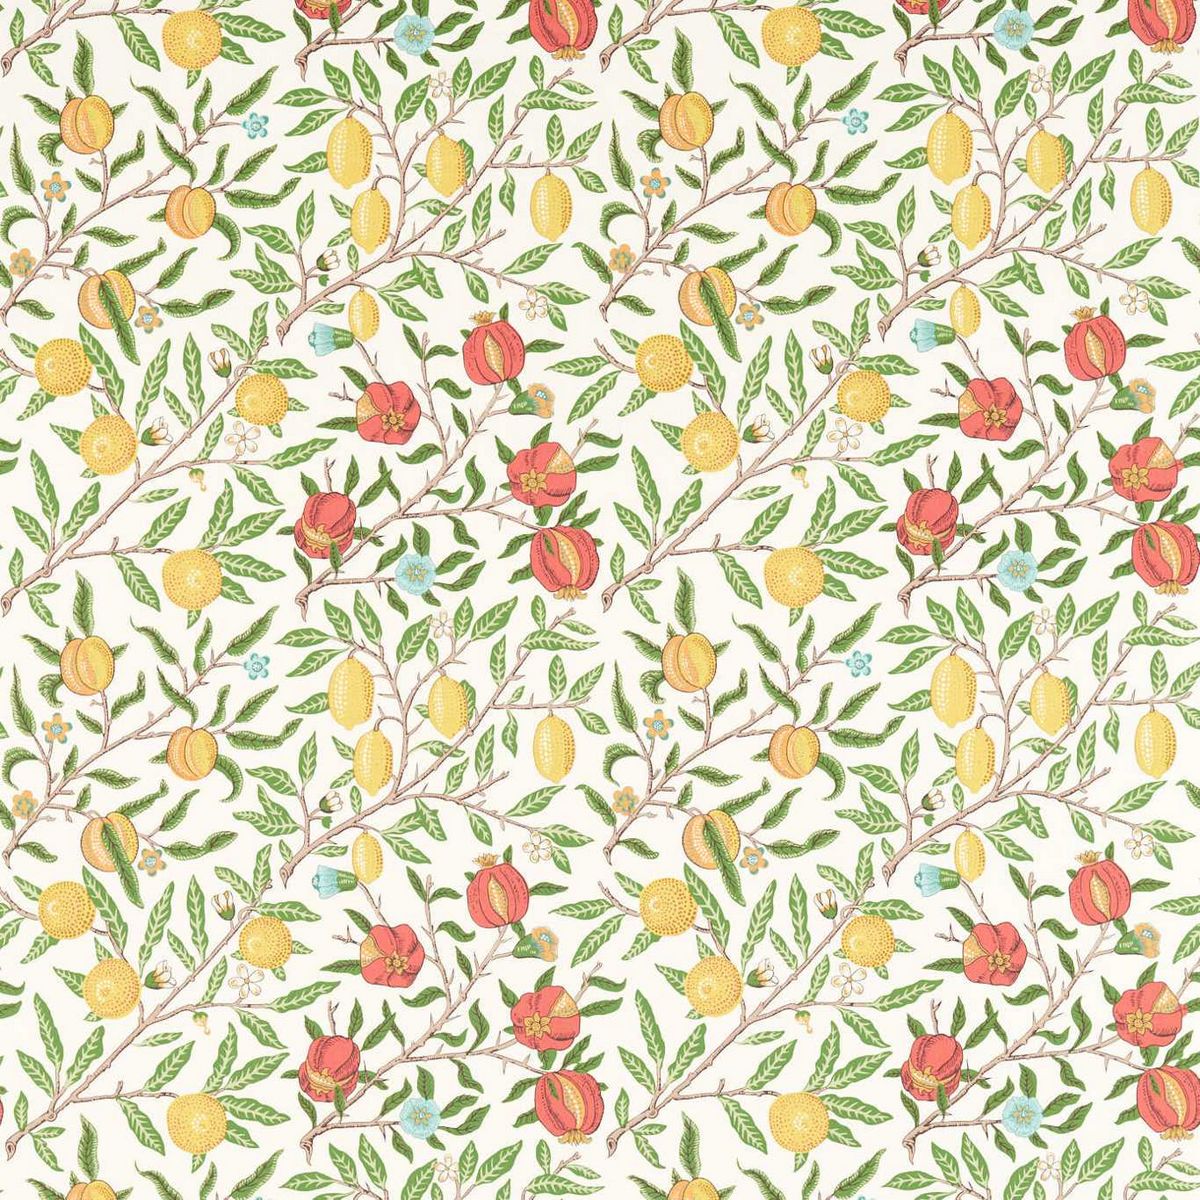 Fruit Leaf Green/Madder Fabric by William Morris & Co.